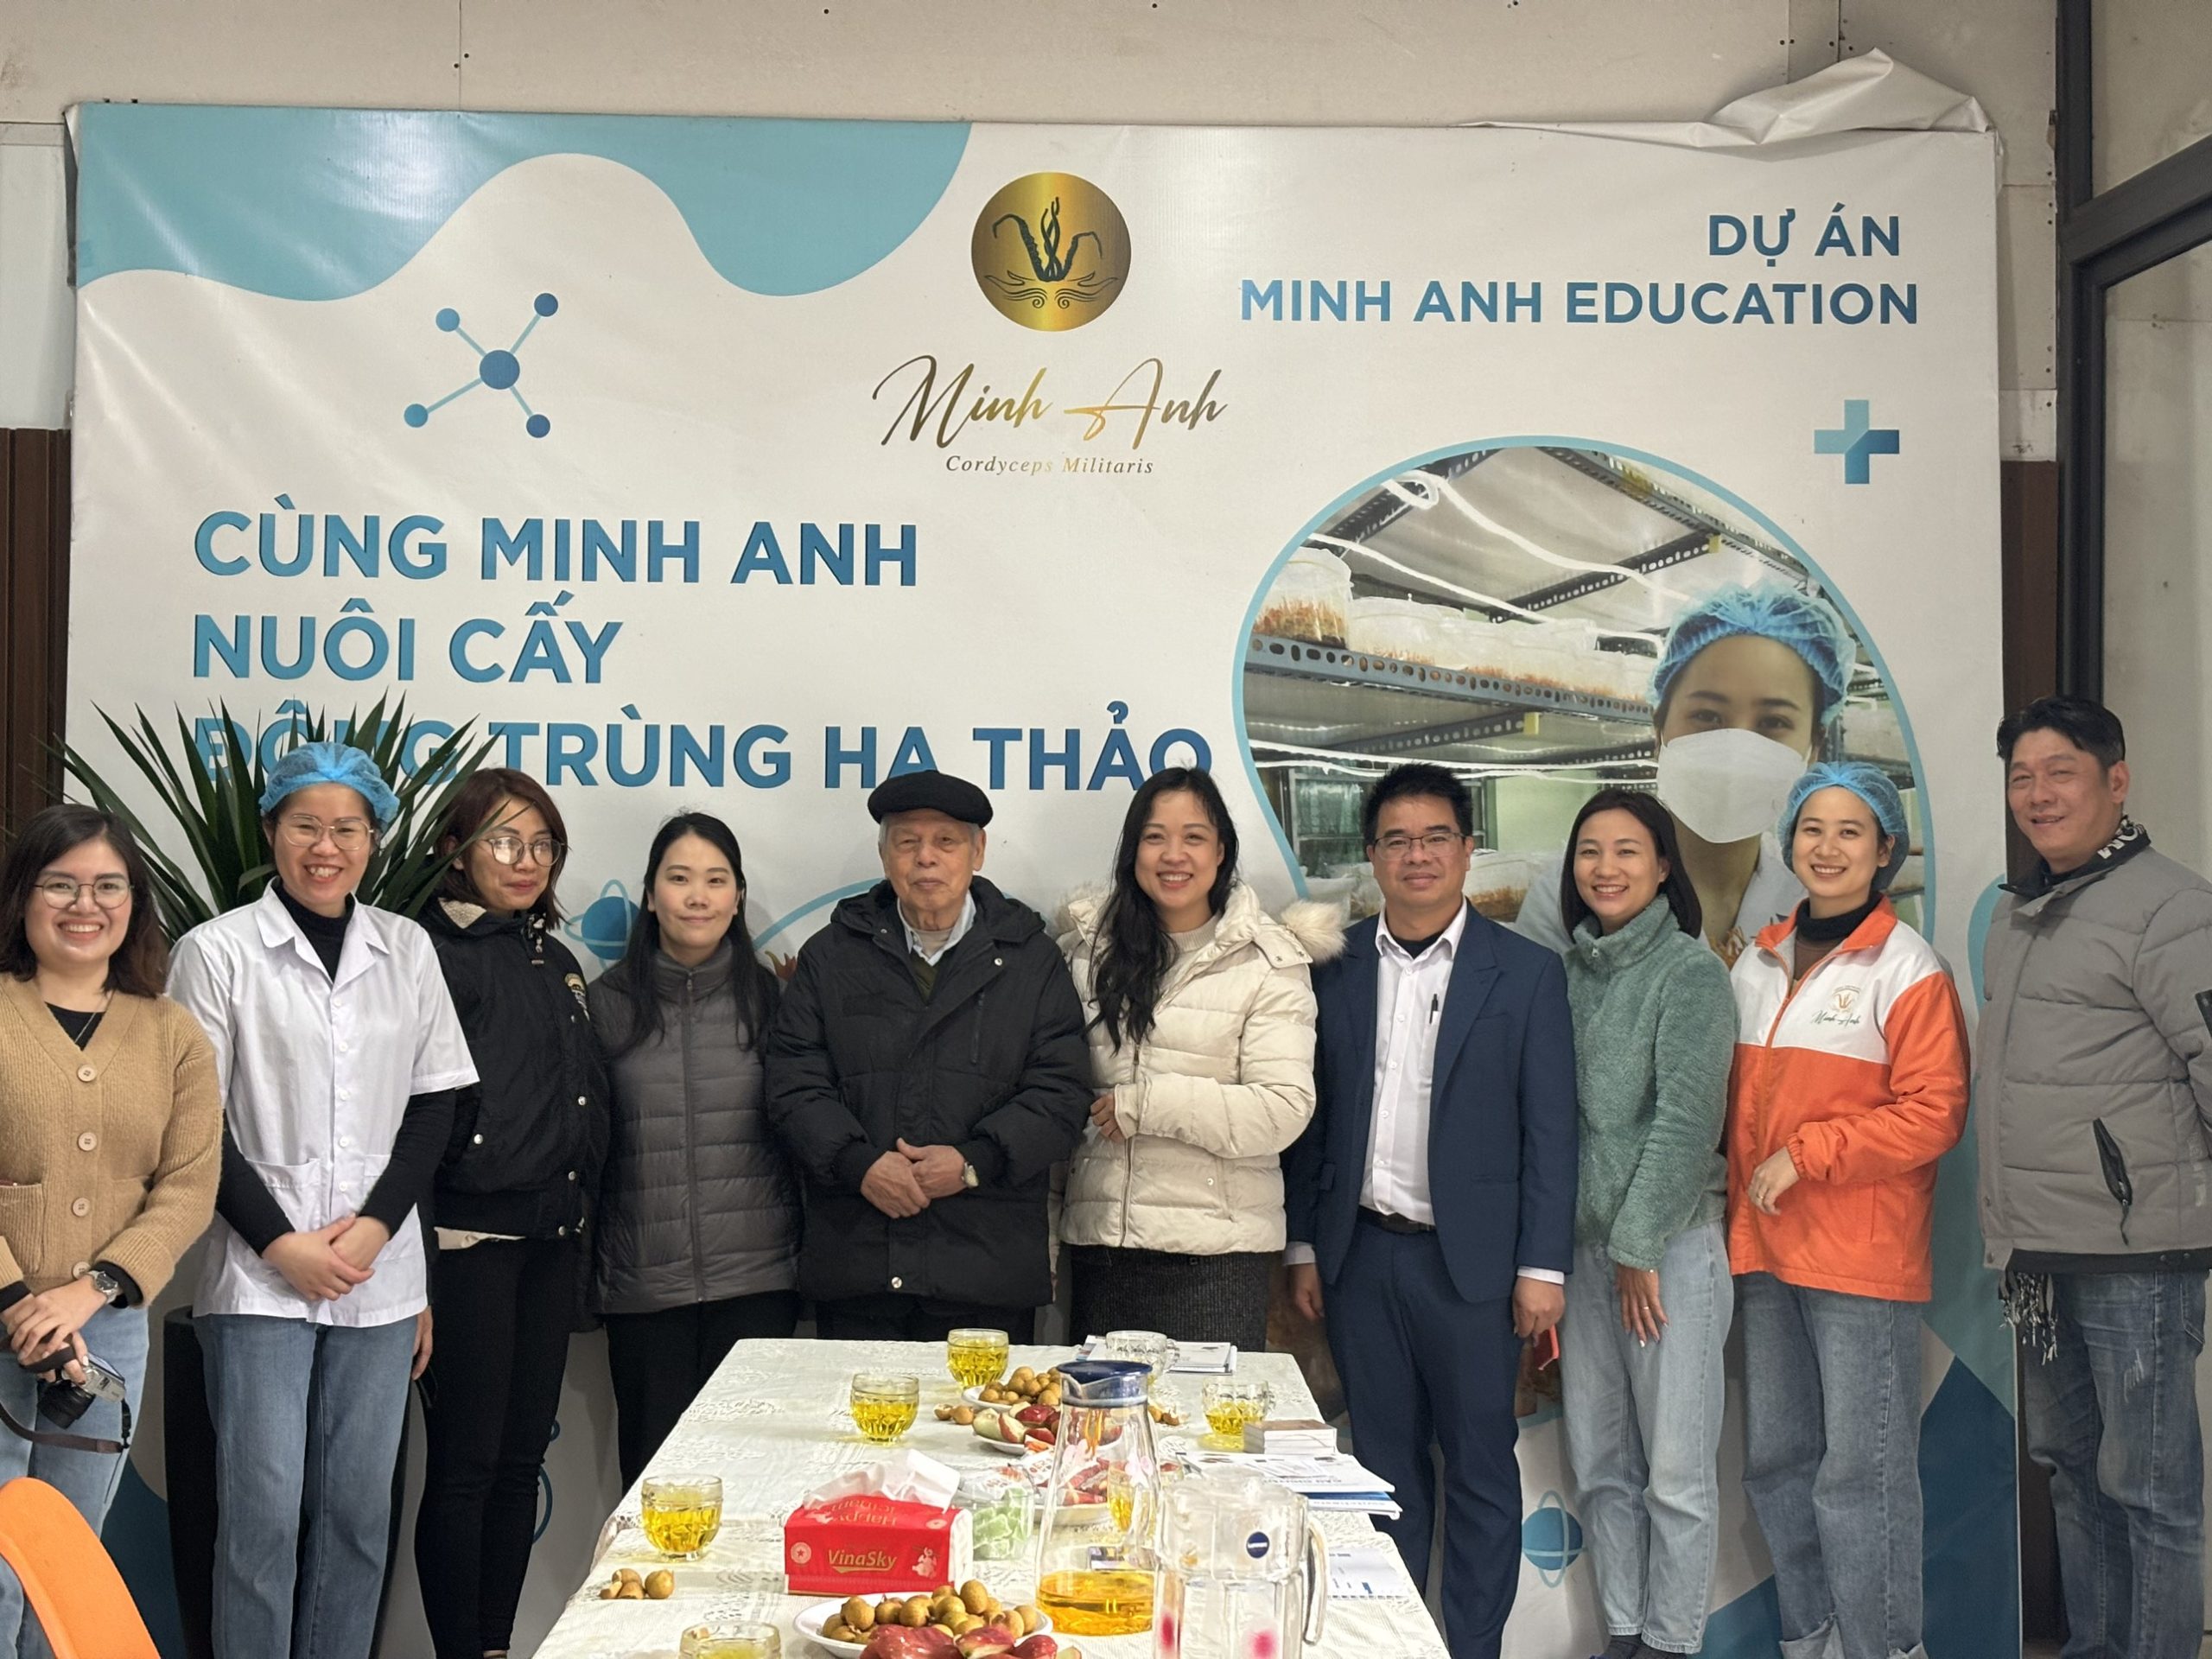 VIRI visited and worked with Minh Anh High Technology Development Company Limited